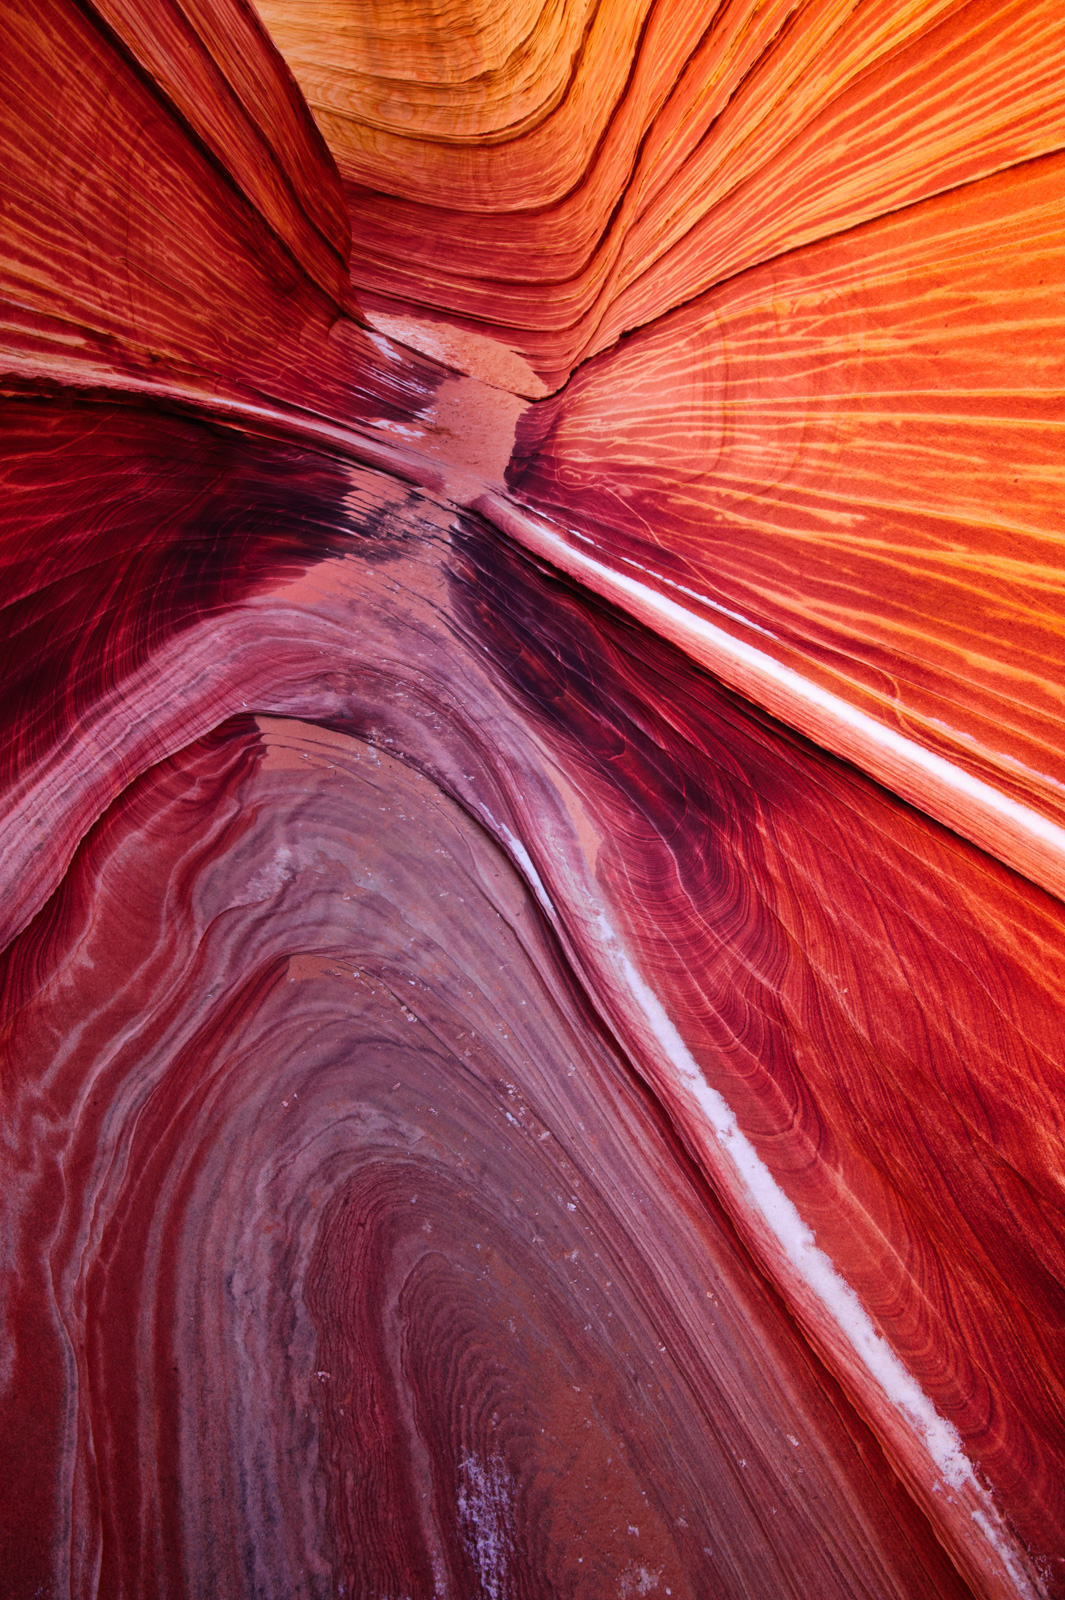 Glowing sandstone at the Wave, Coyote Buttes Wilderness, Arizona